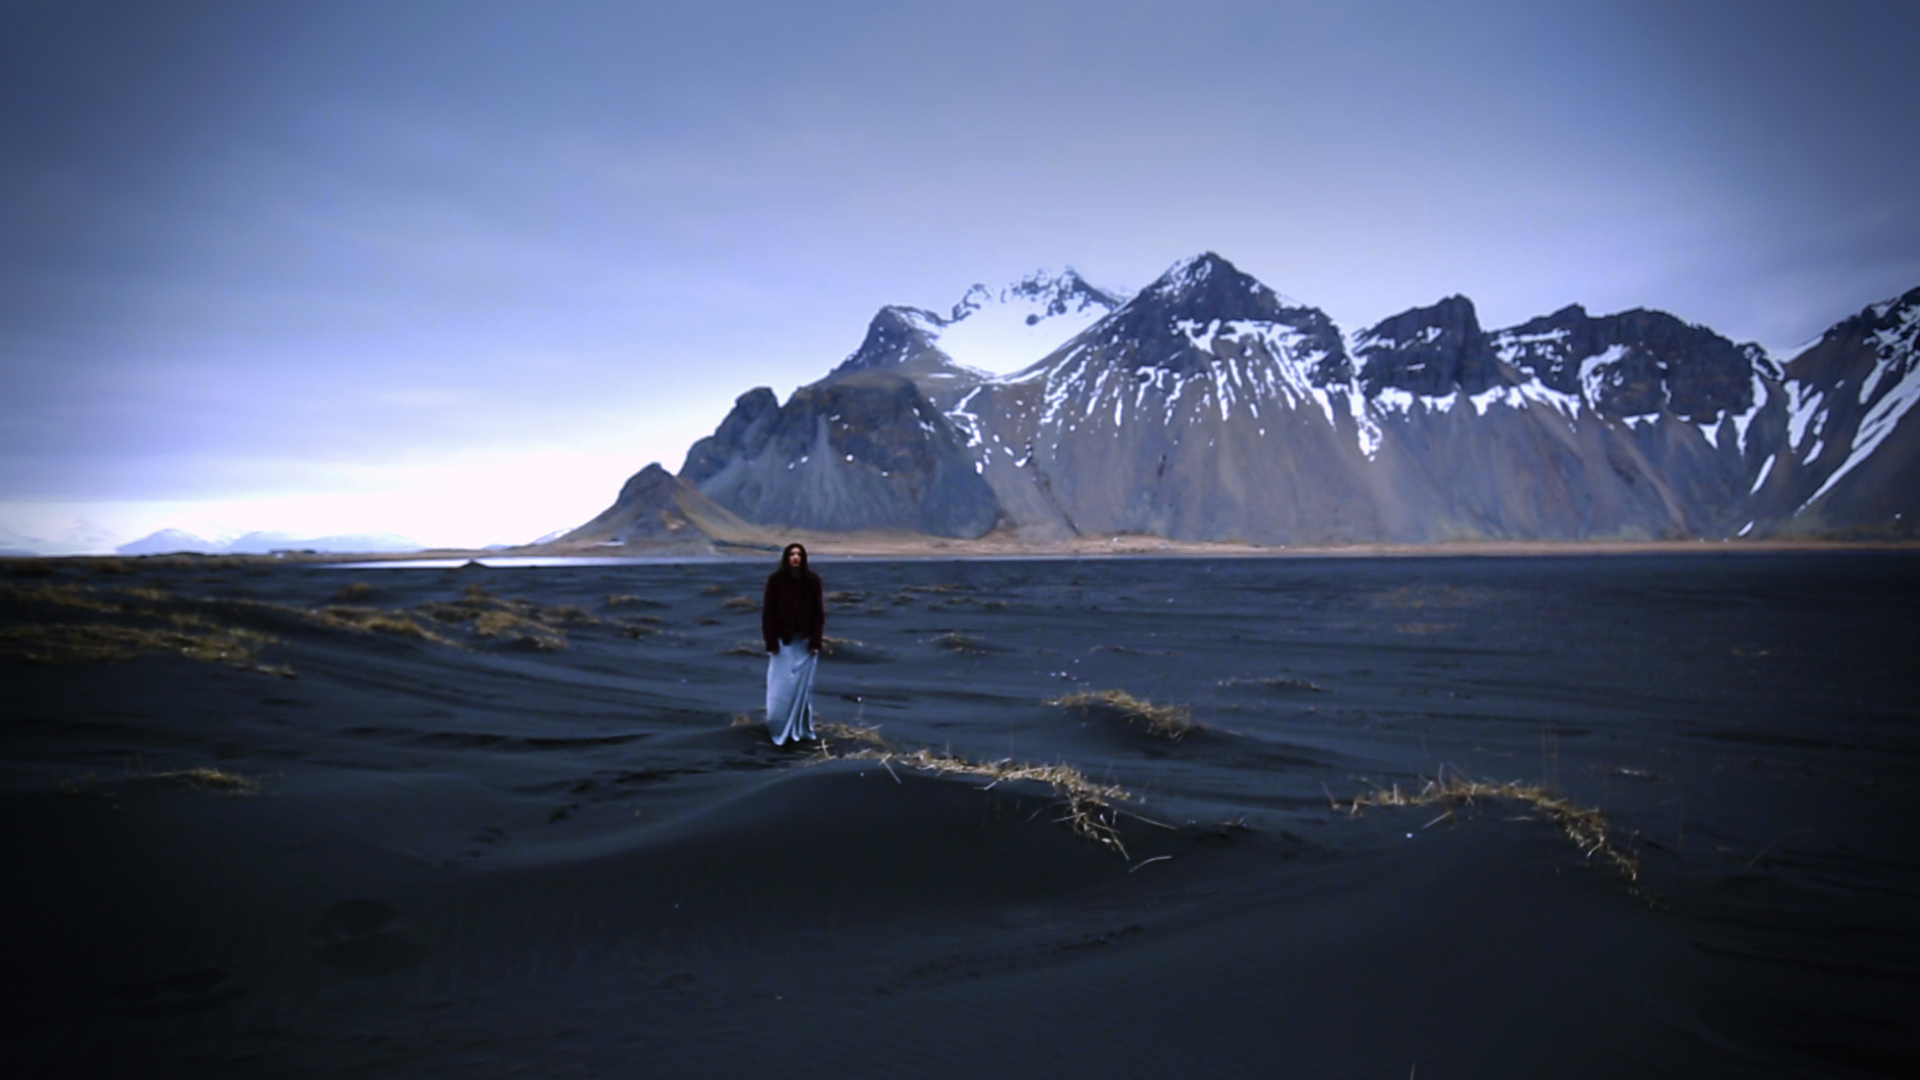 Francesca Miccoli on location in Iceland on the black sand beach Filming Angels and Demons